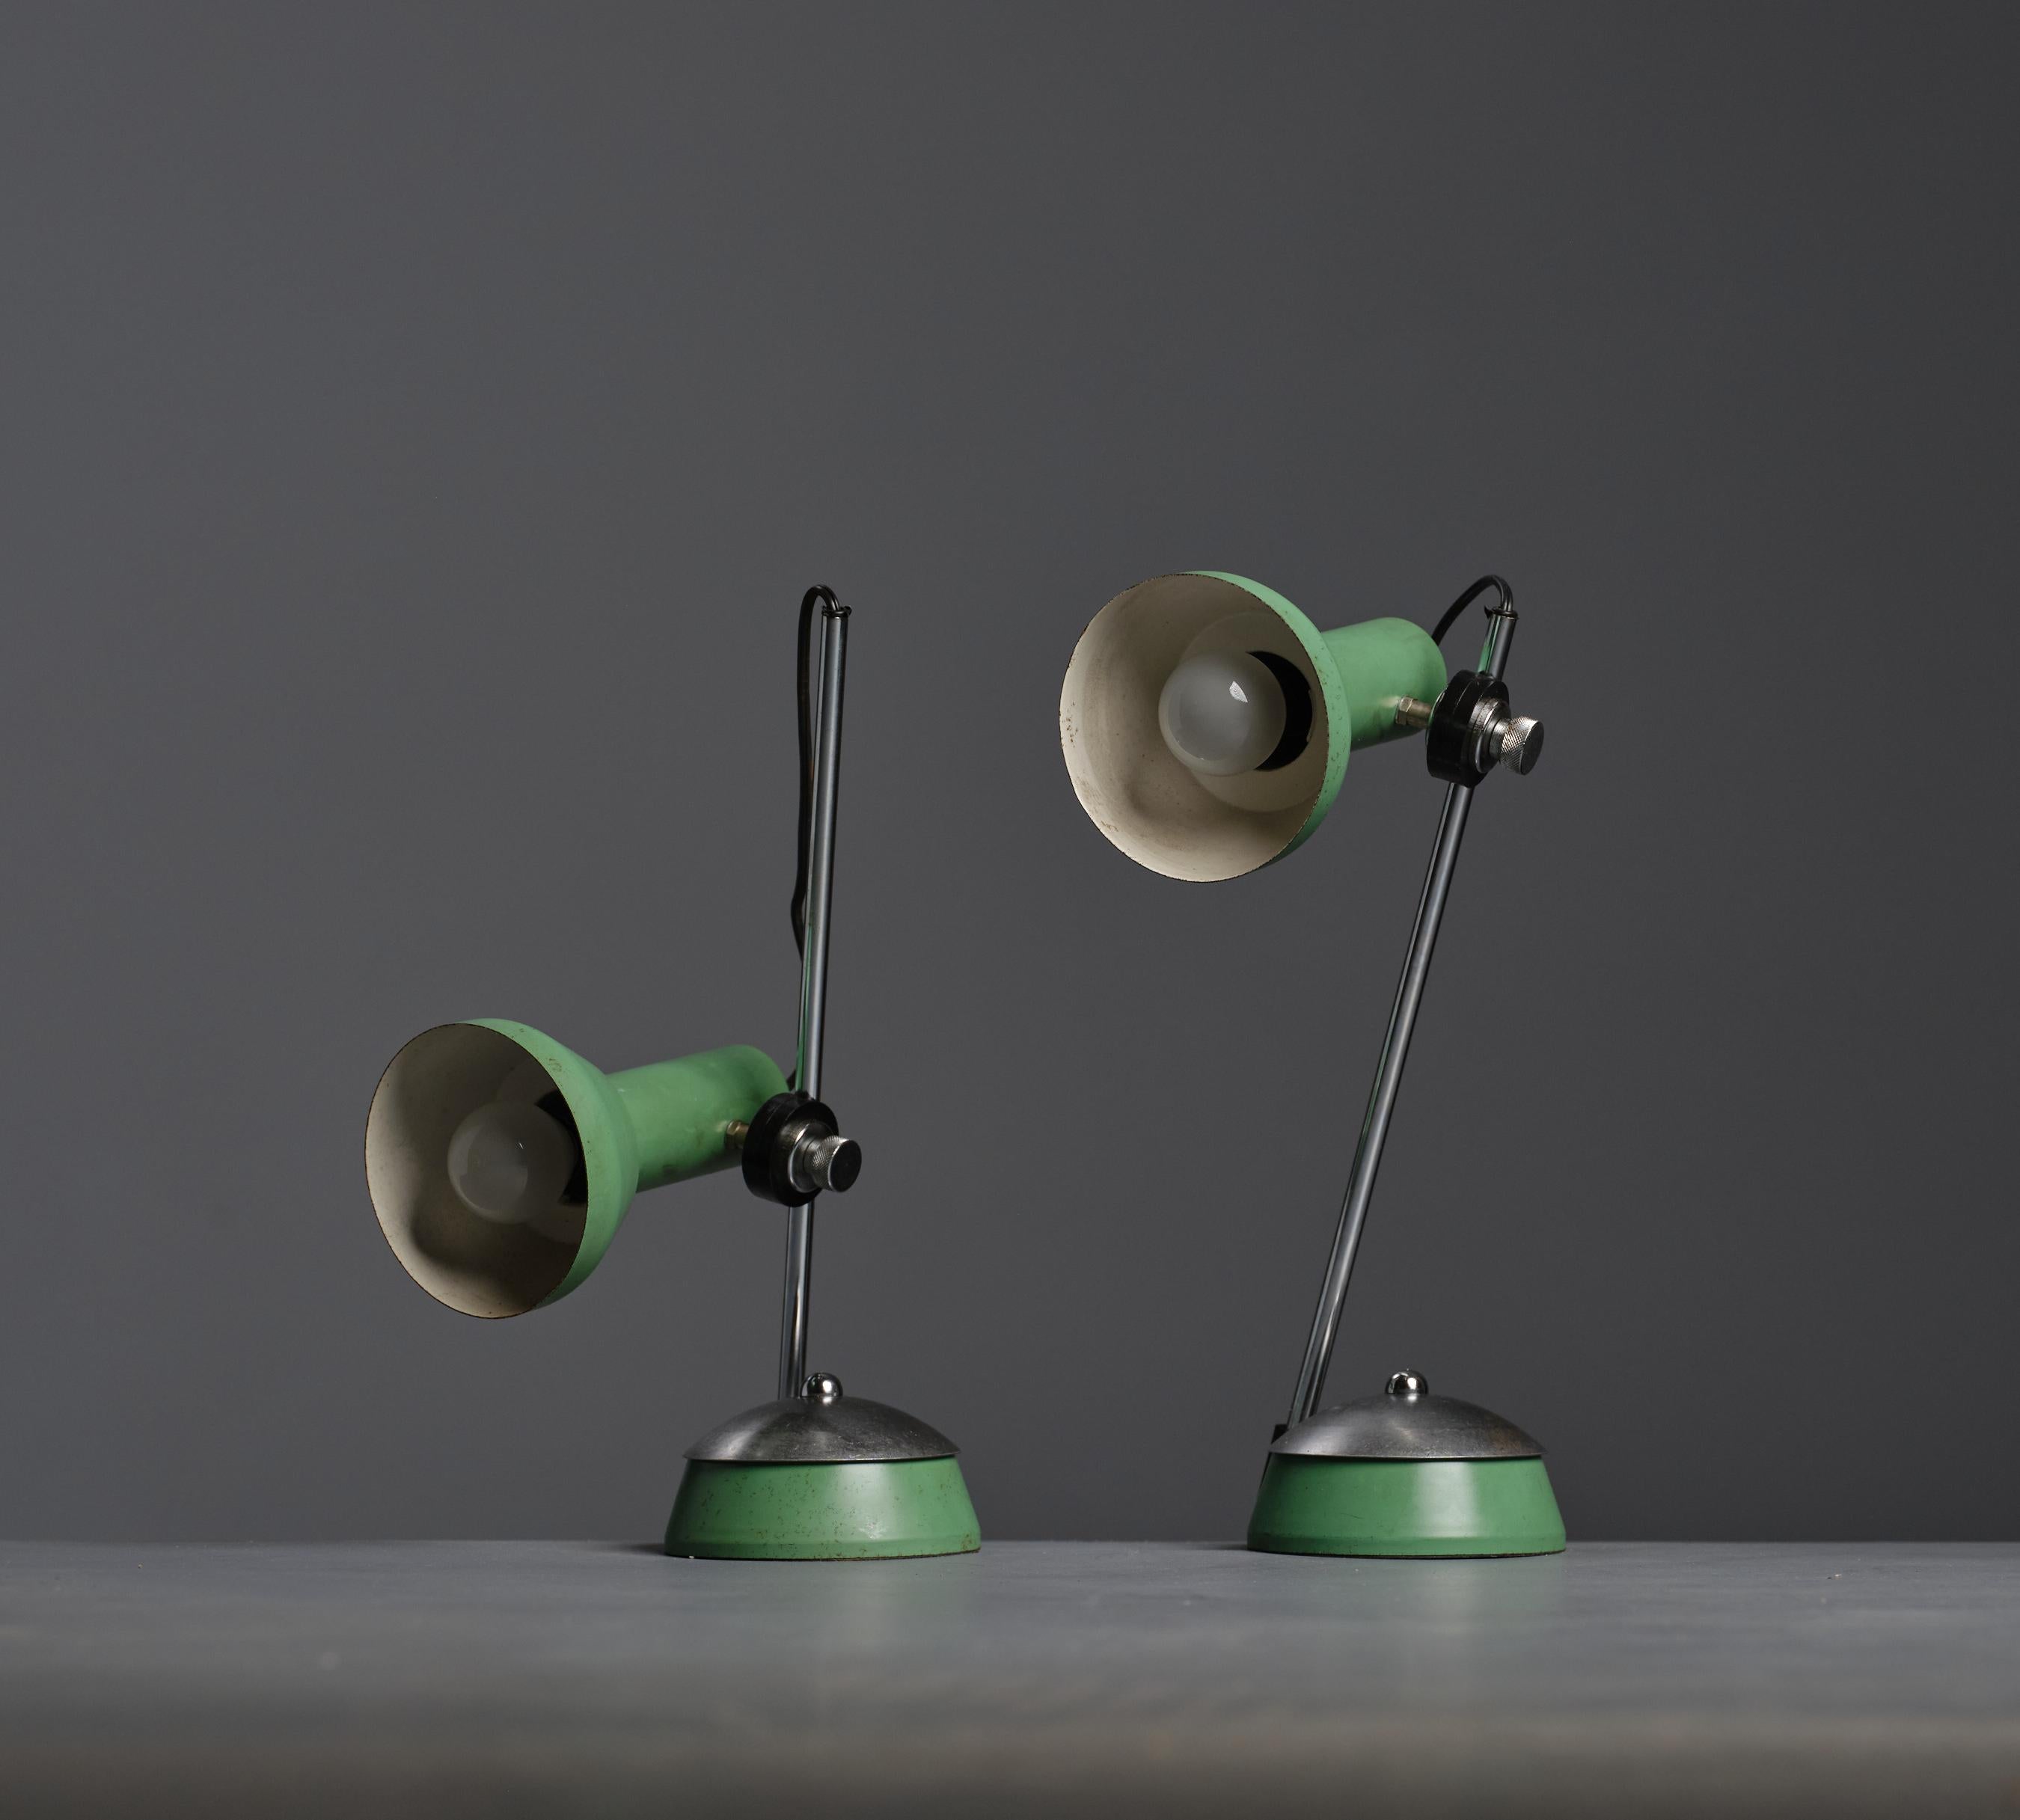 Discover the perfect blend of vintage charm and modern aesthetics with this remarkable pair of 70's table lamps. These eye-catching lamps feature a delightful green hue complemented by stylish steel accents, exuding timeless elegance and